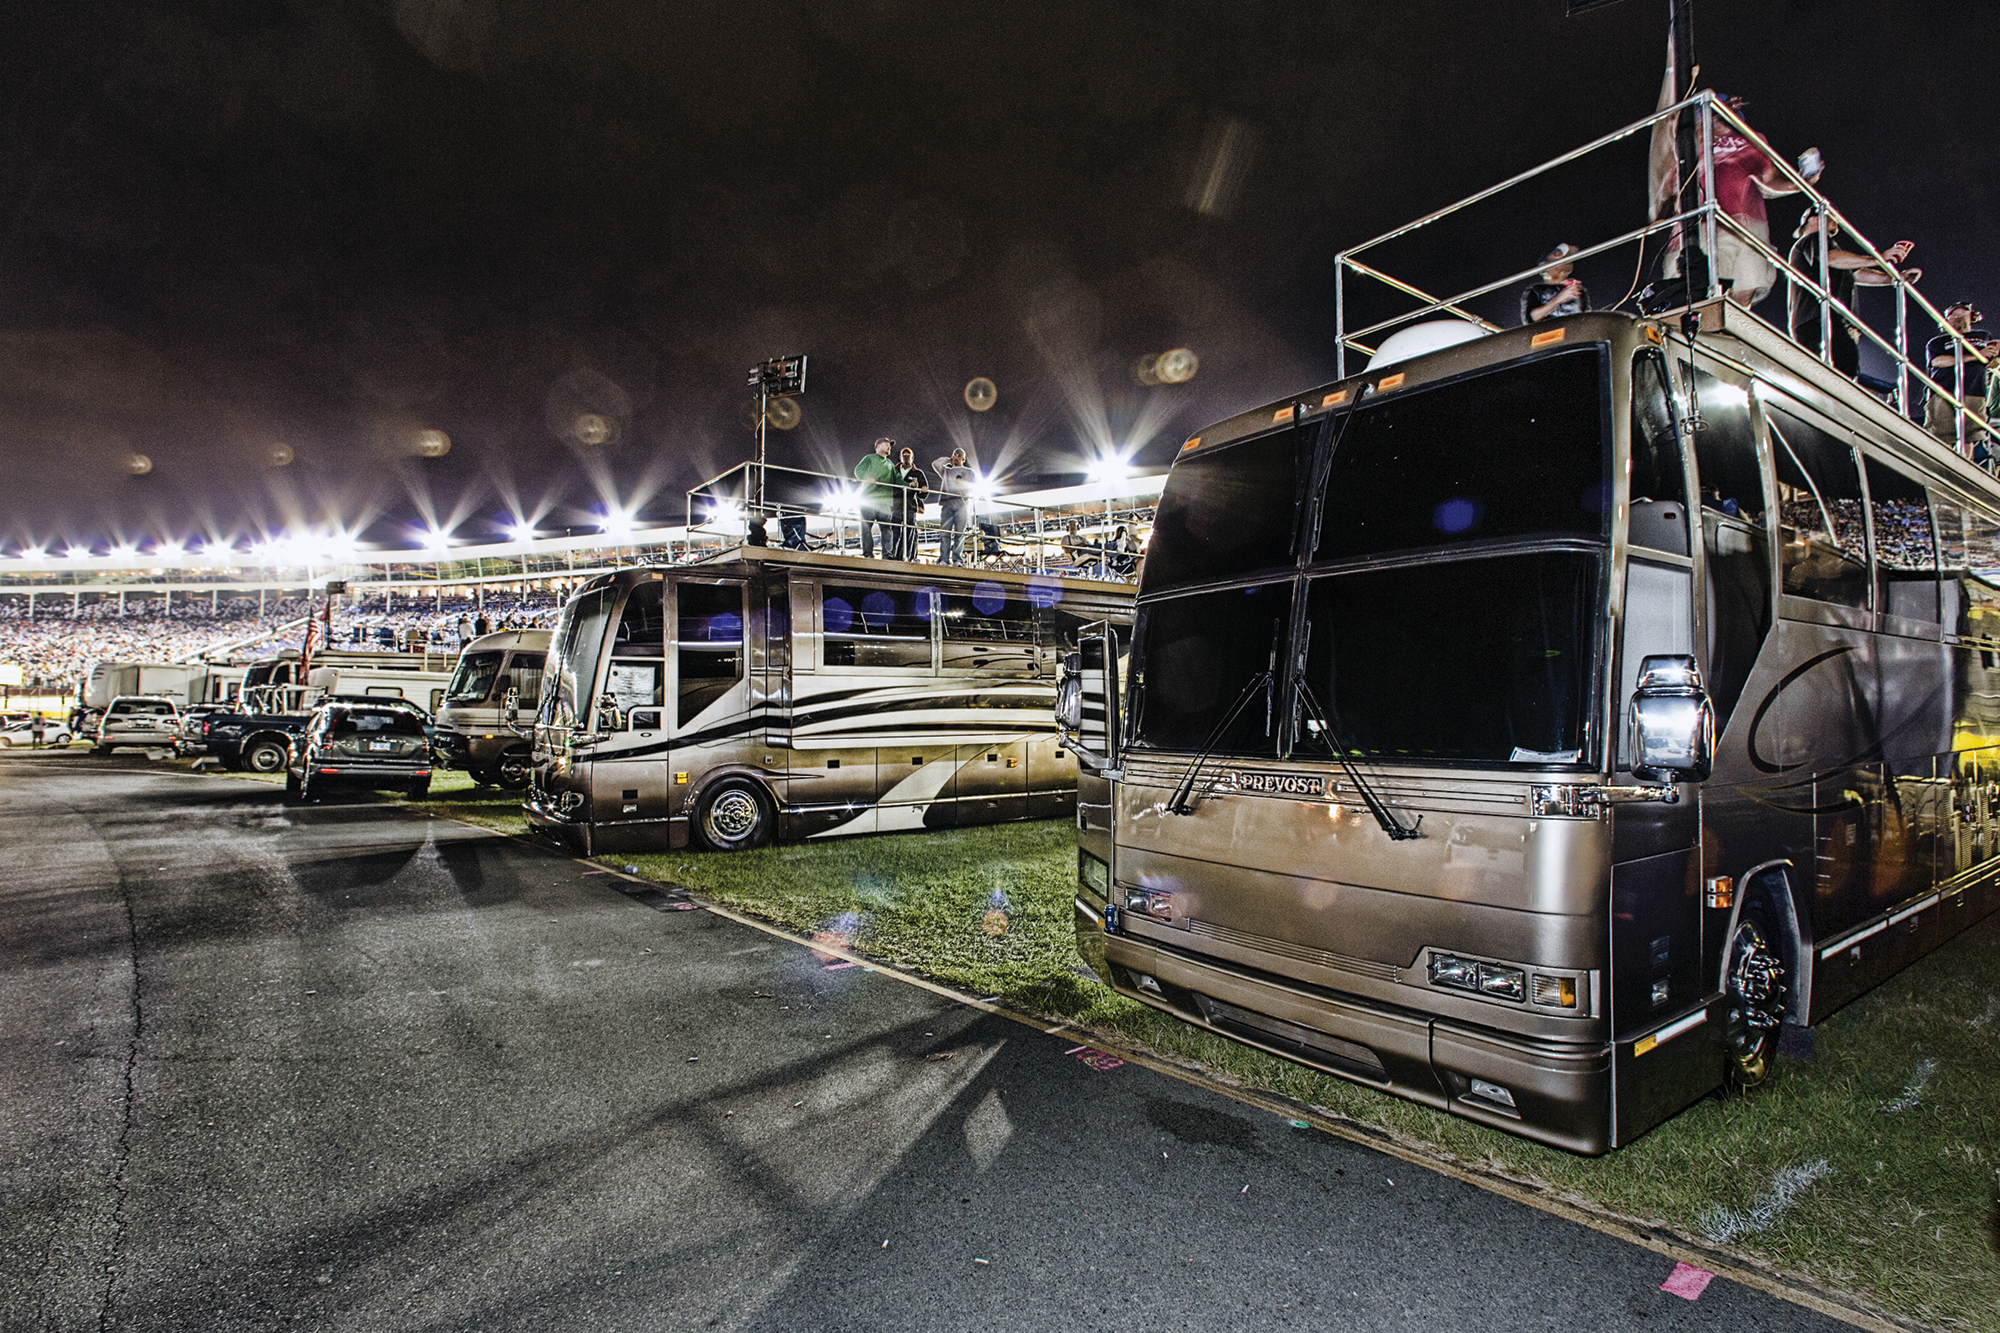 2013 Prevost becomes The Official Luxury Motorcoach of NASCAR.